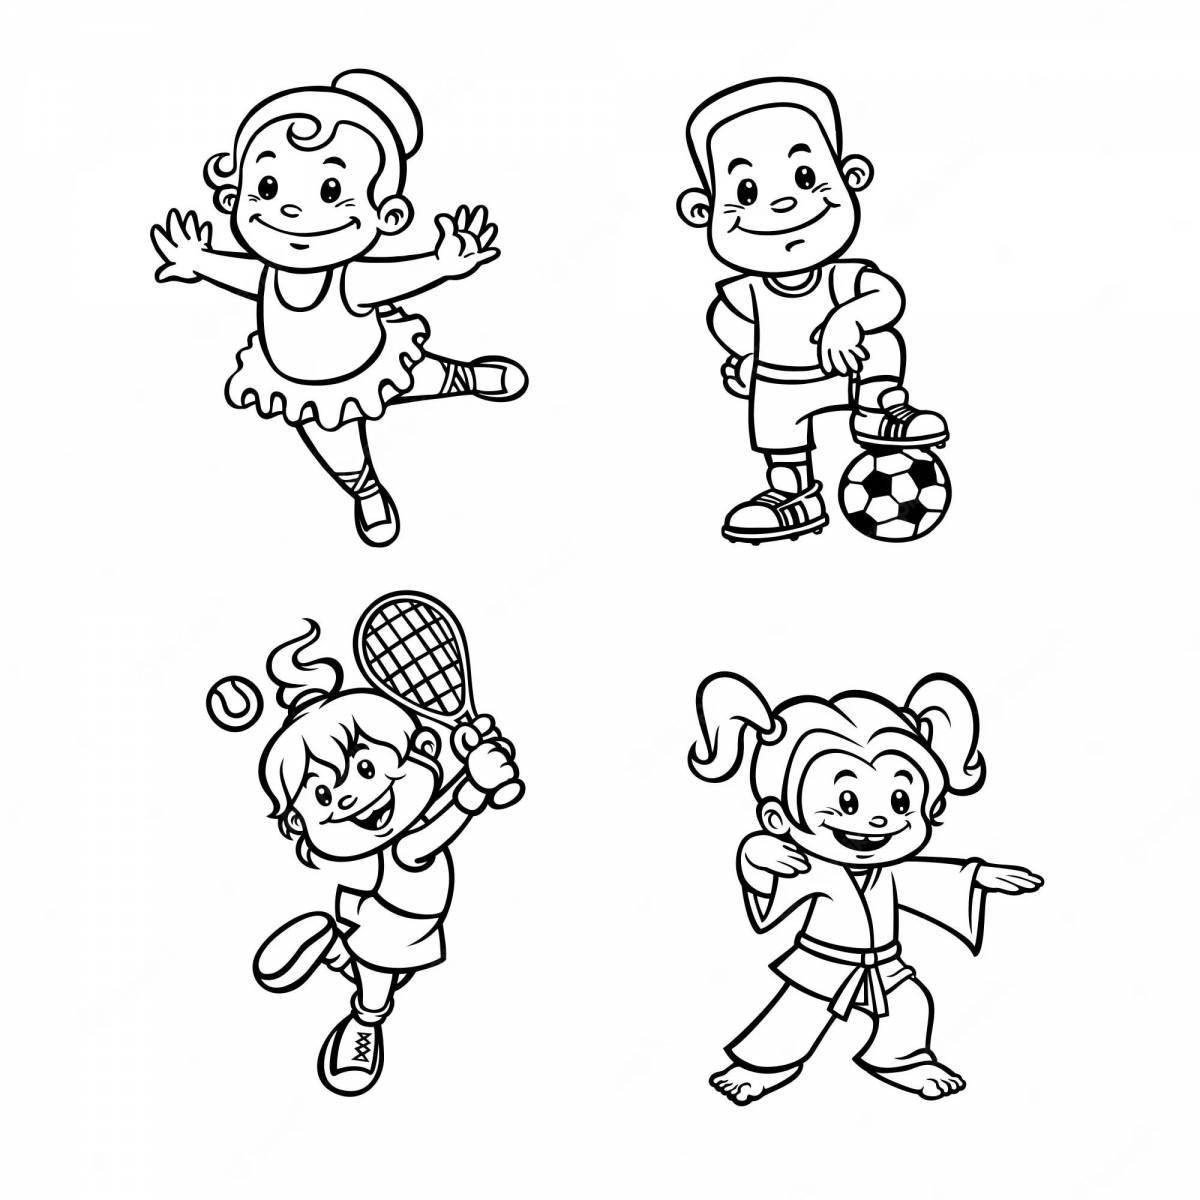 Great sports coloring book for preschoolers